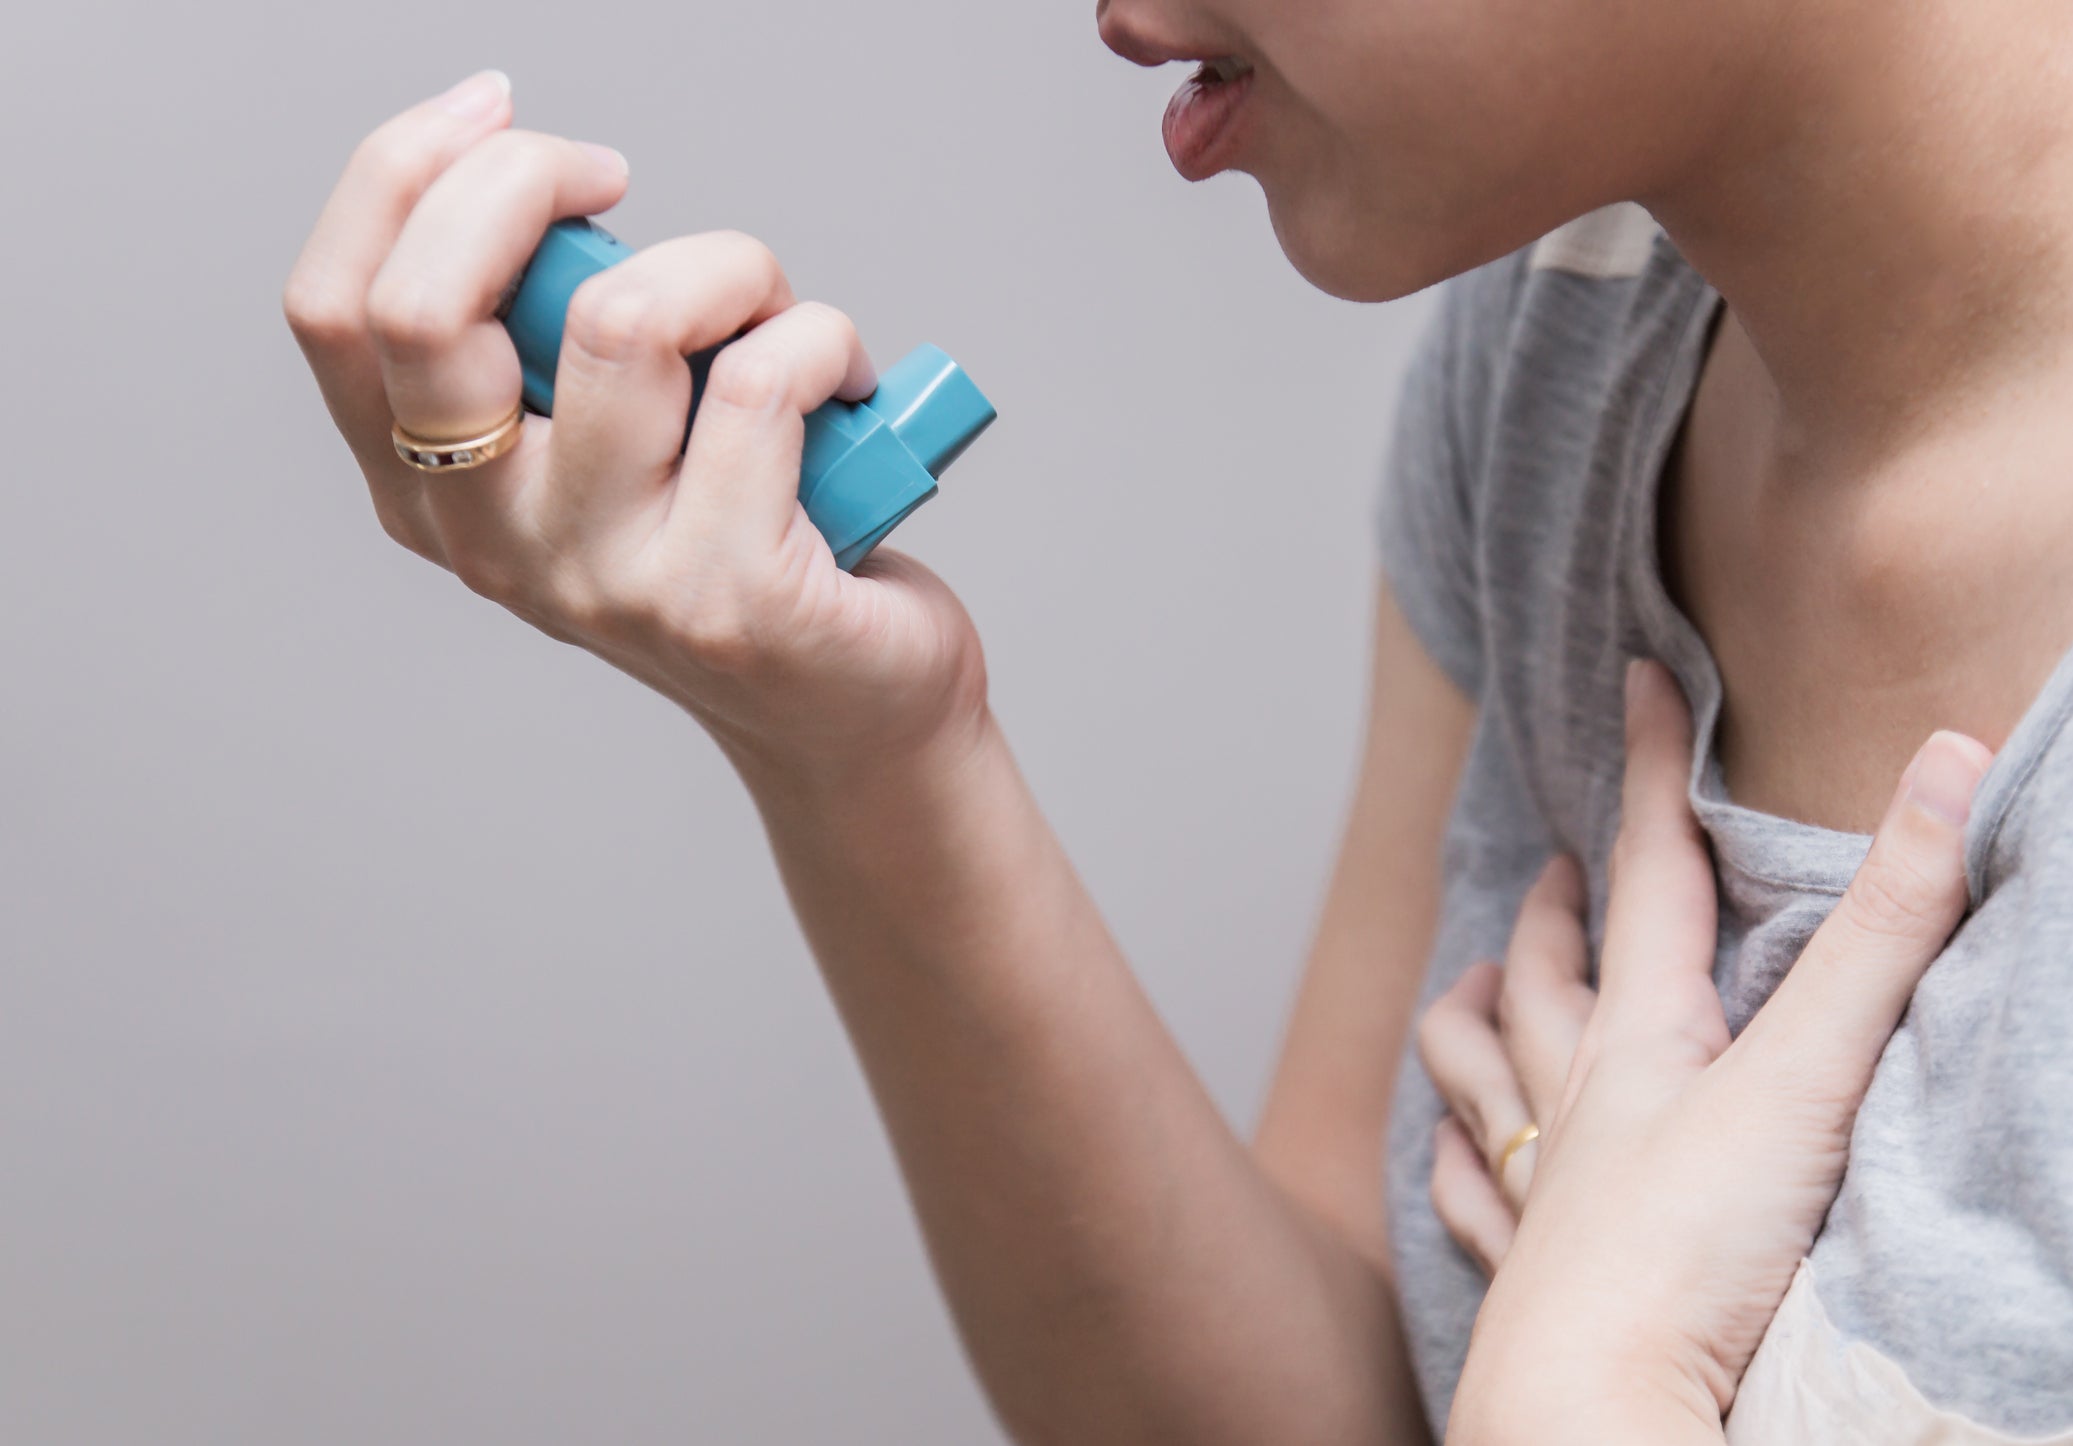 Severe asthma sufferers were added to the government’s vaccine priority list back in February